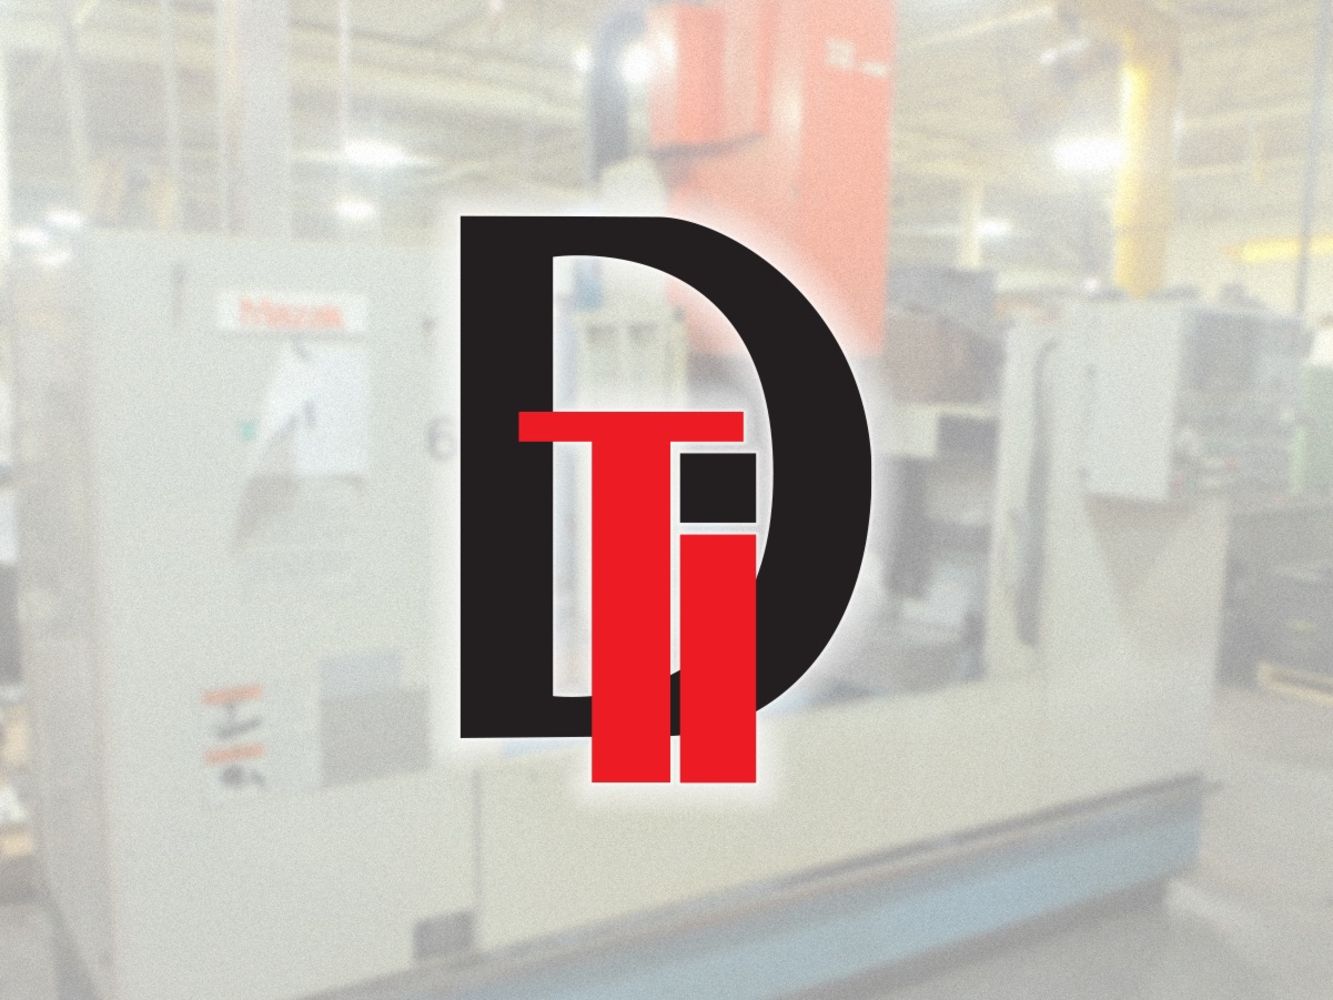 Machine Tools and Support Equipment – Surplus to ongoing operations at Diversified Tooling Innovations plus consignments